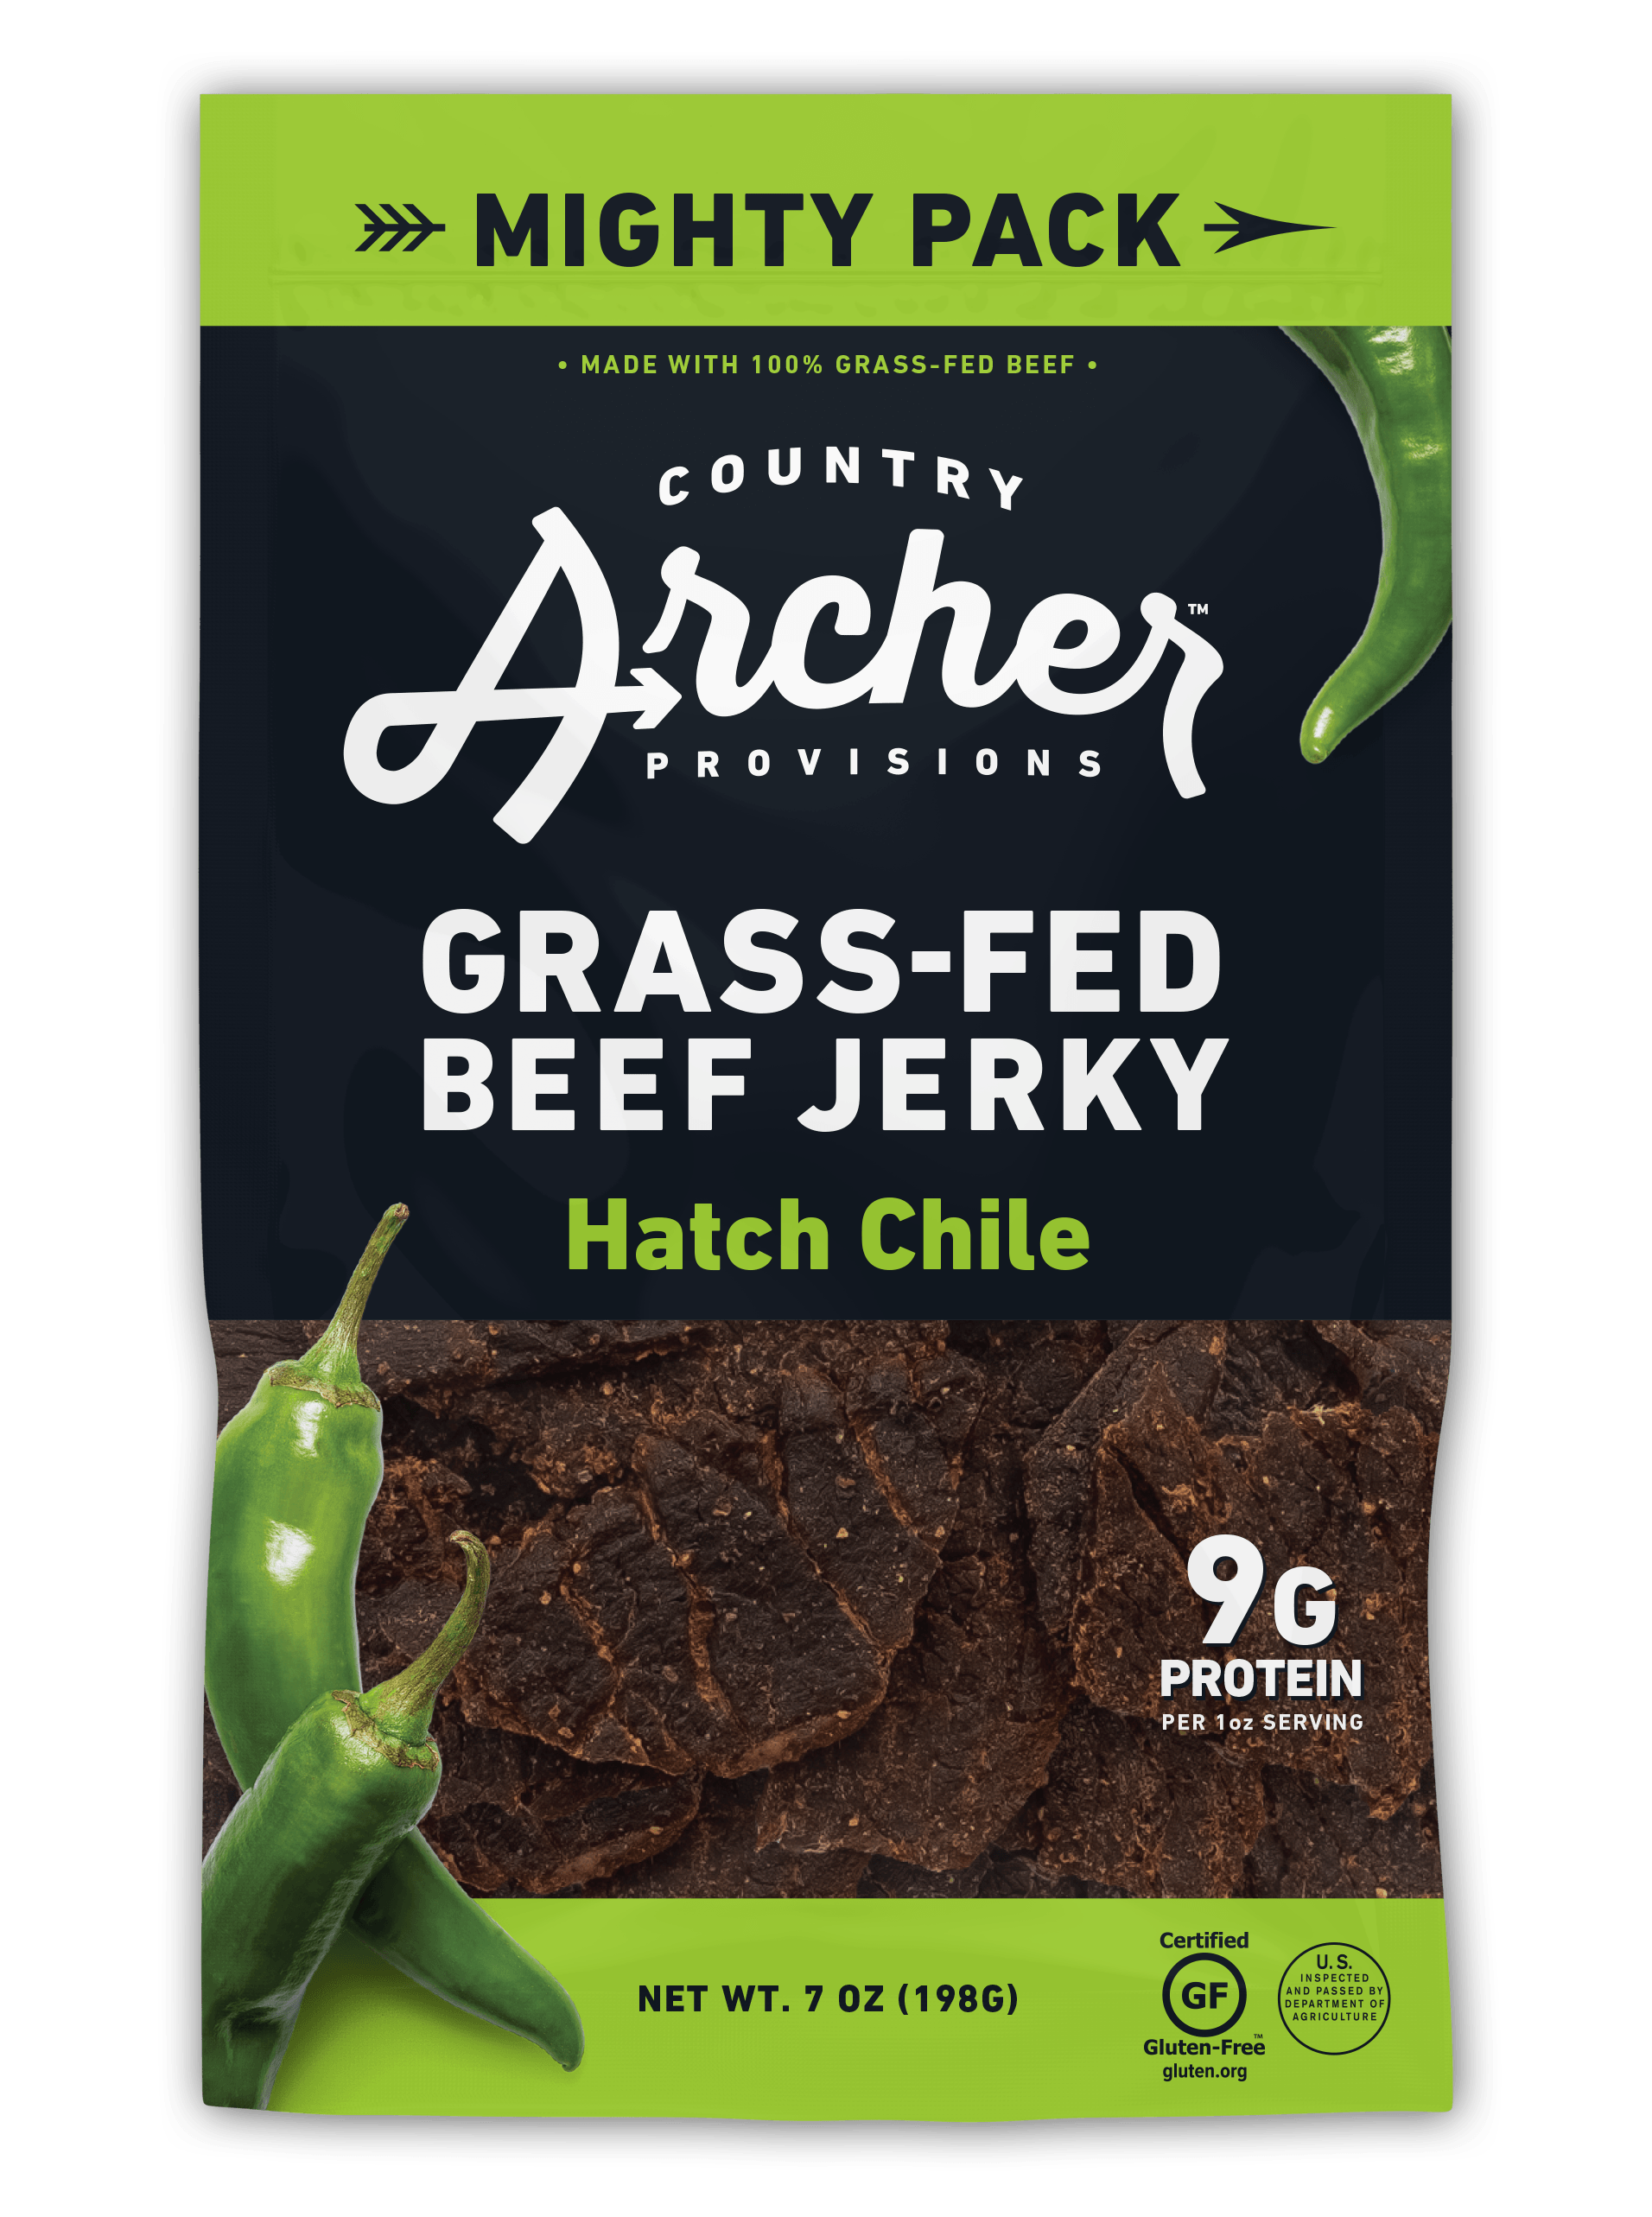  Hatch Chile Beef Jerky by Country Archer, 7oz (8ct Box), Beef - Gluten-Free, hatch-chile-beef-jerky, , 7oz (8ct Box)